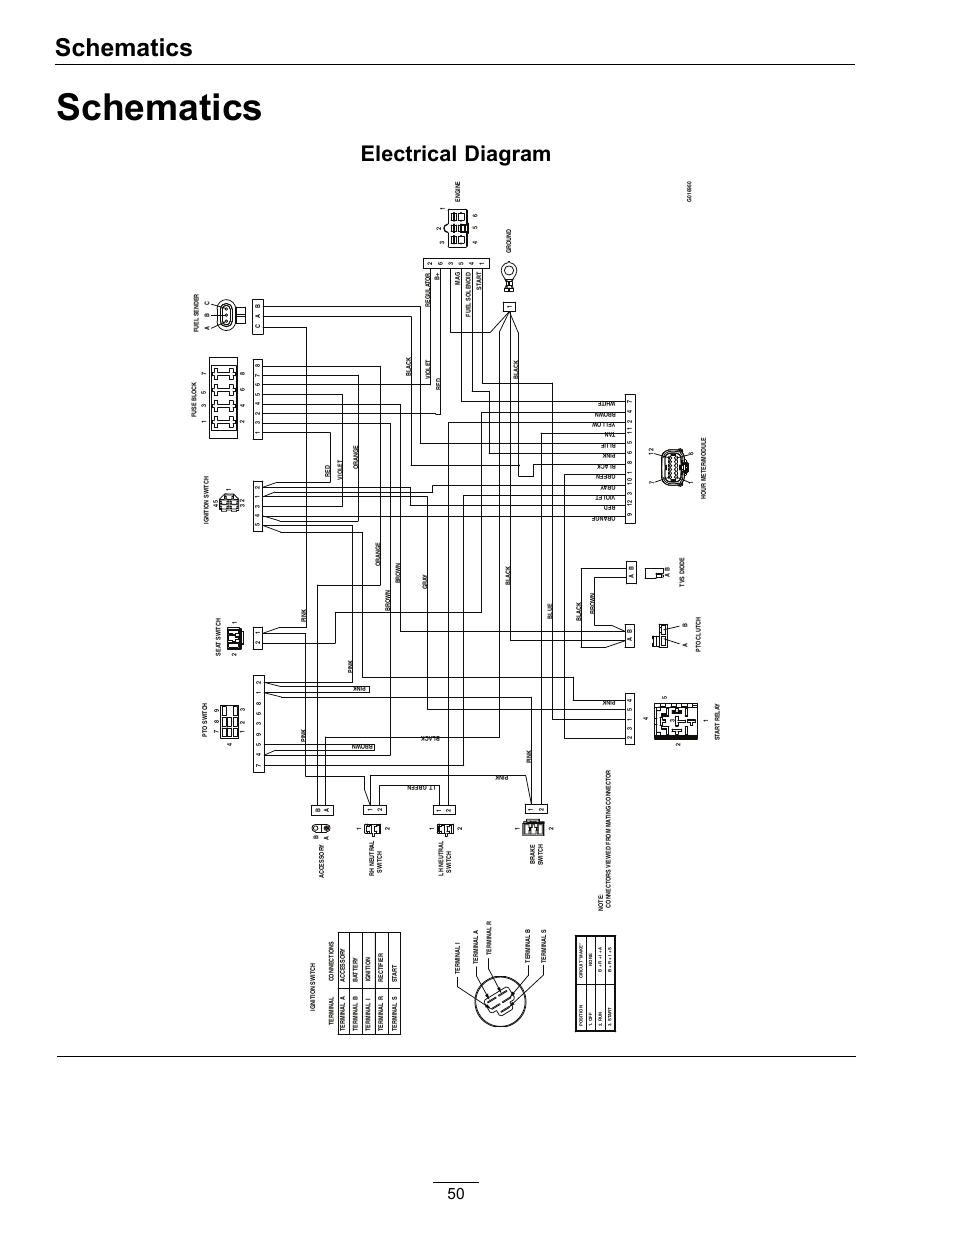 google google i need the wiring diagram for a kohler cub cadet with generator and voltage regulator